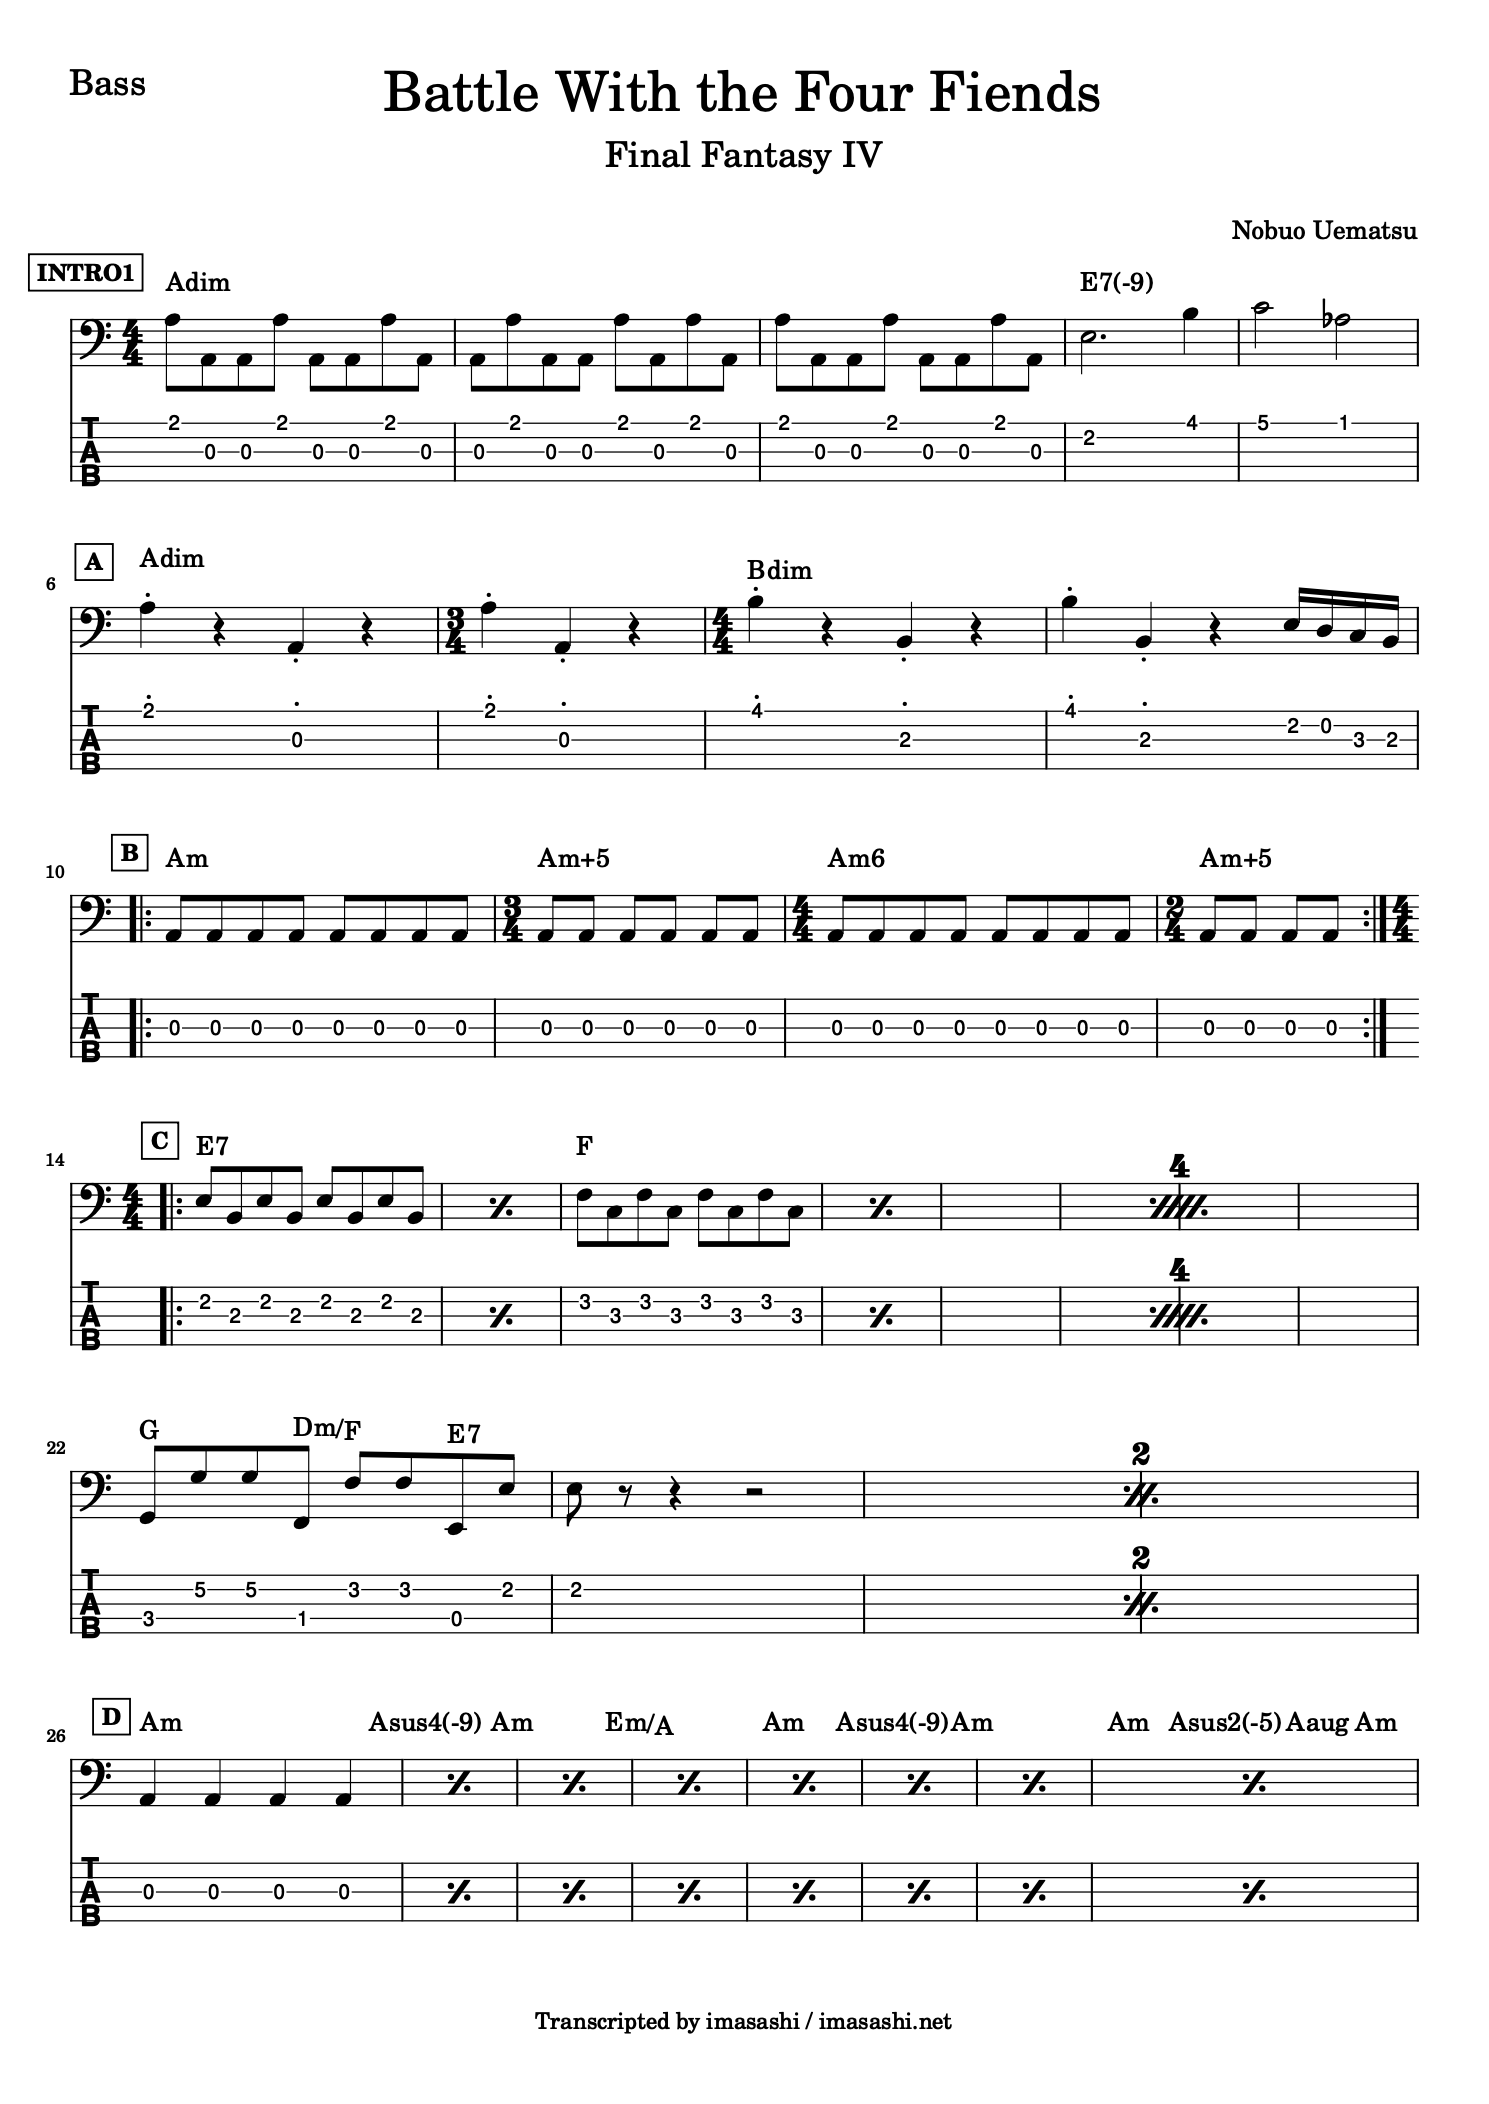 Final Fantasy 4 - Battle With the Four Fiends - Chords and Bass Tab - page 1